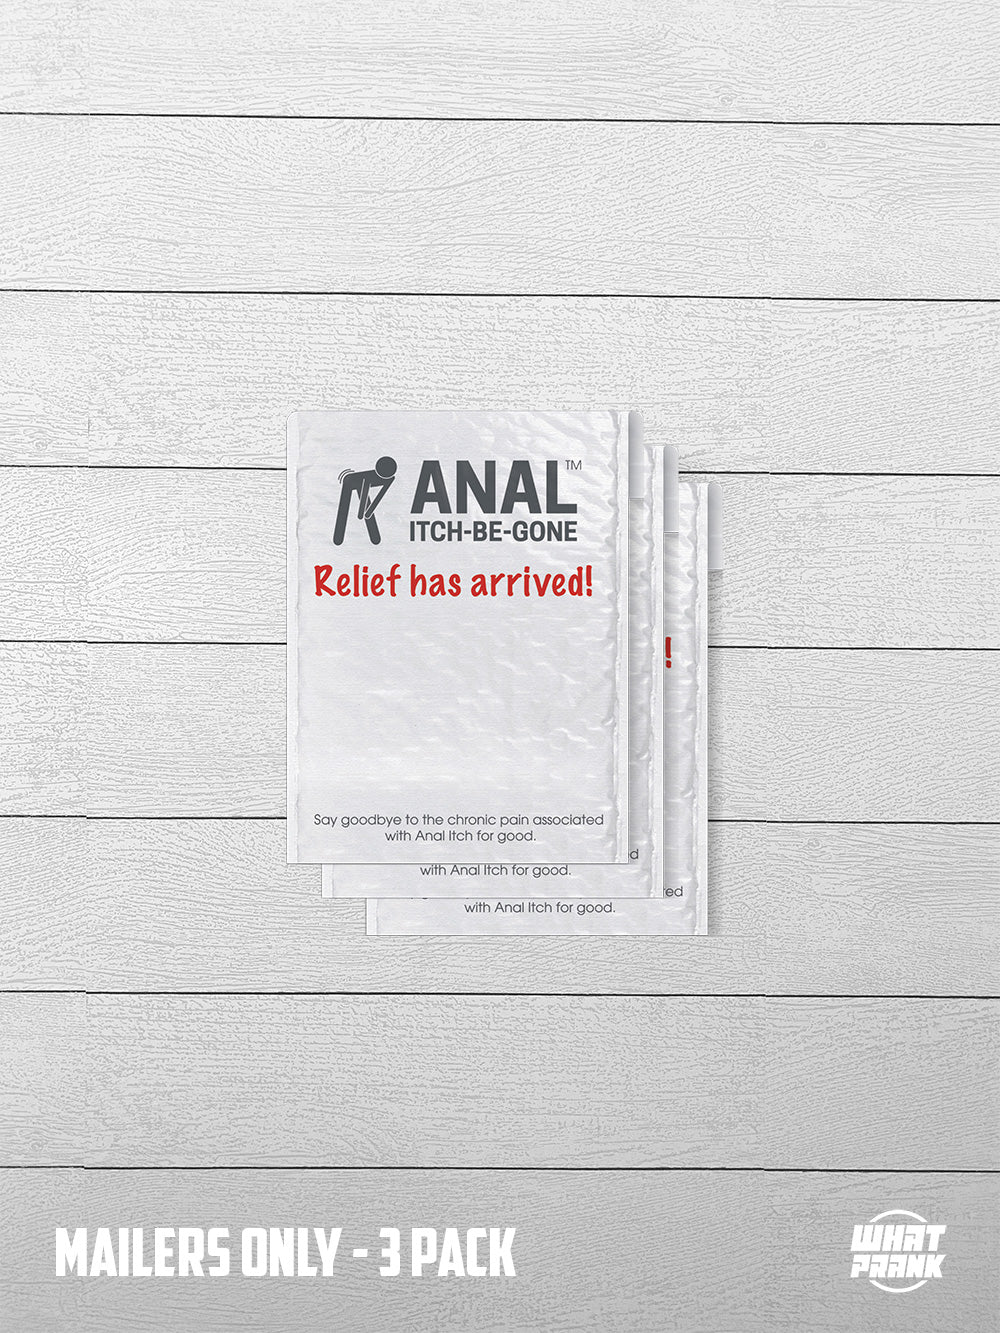 Anal Itch Be-Gone - Individual Mailers